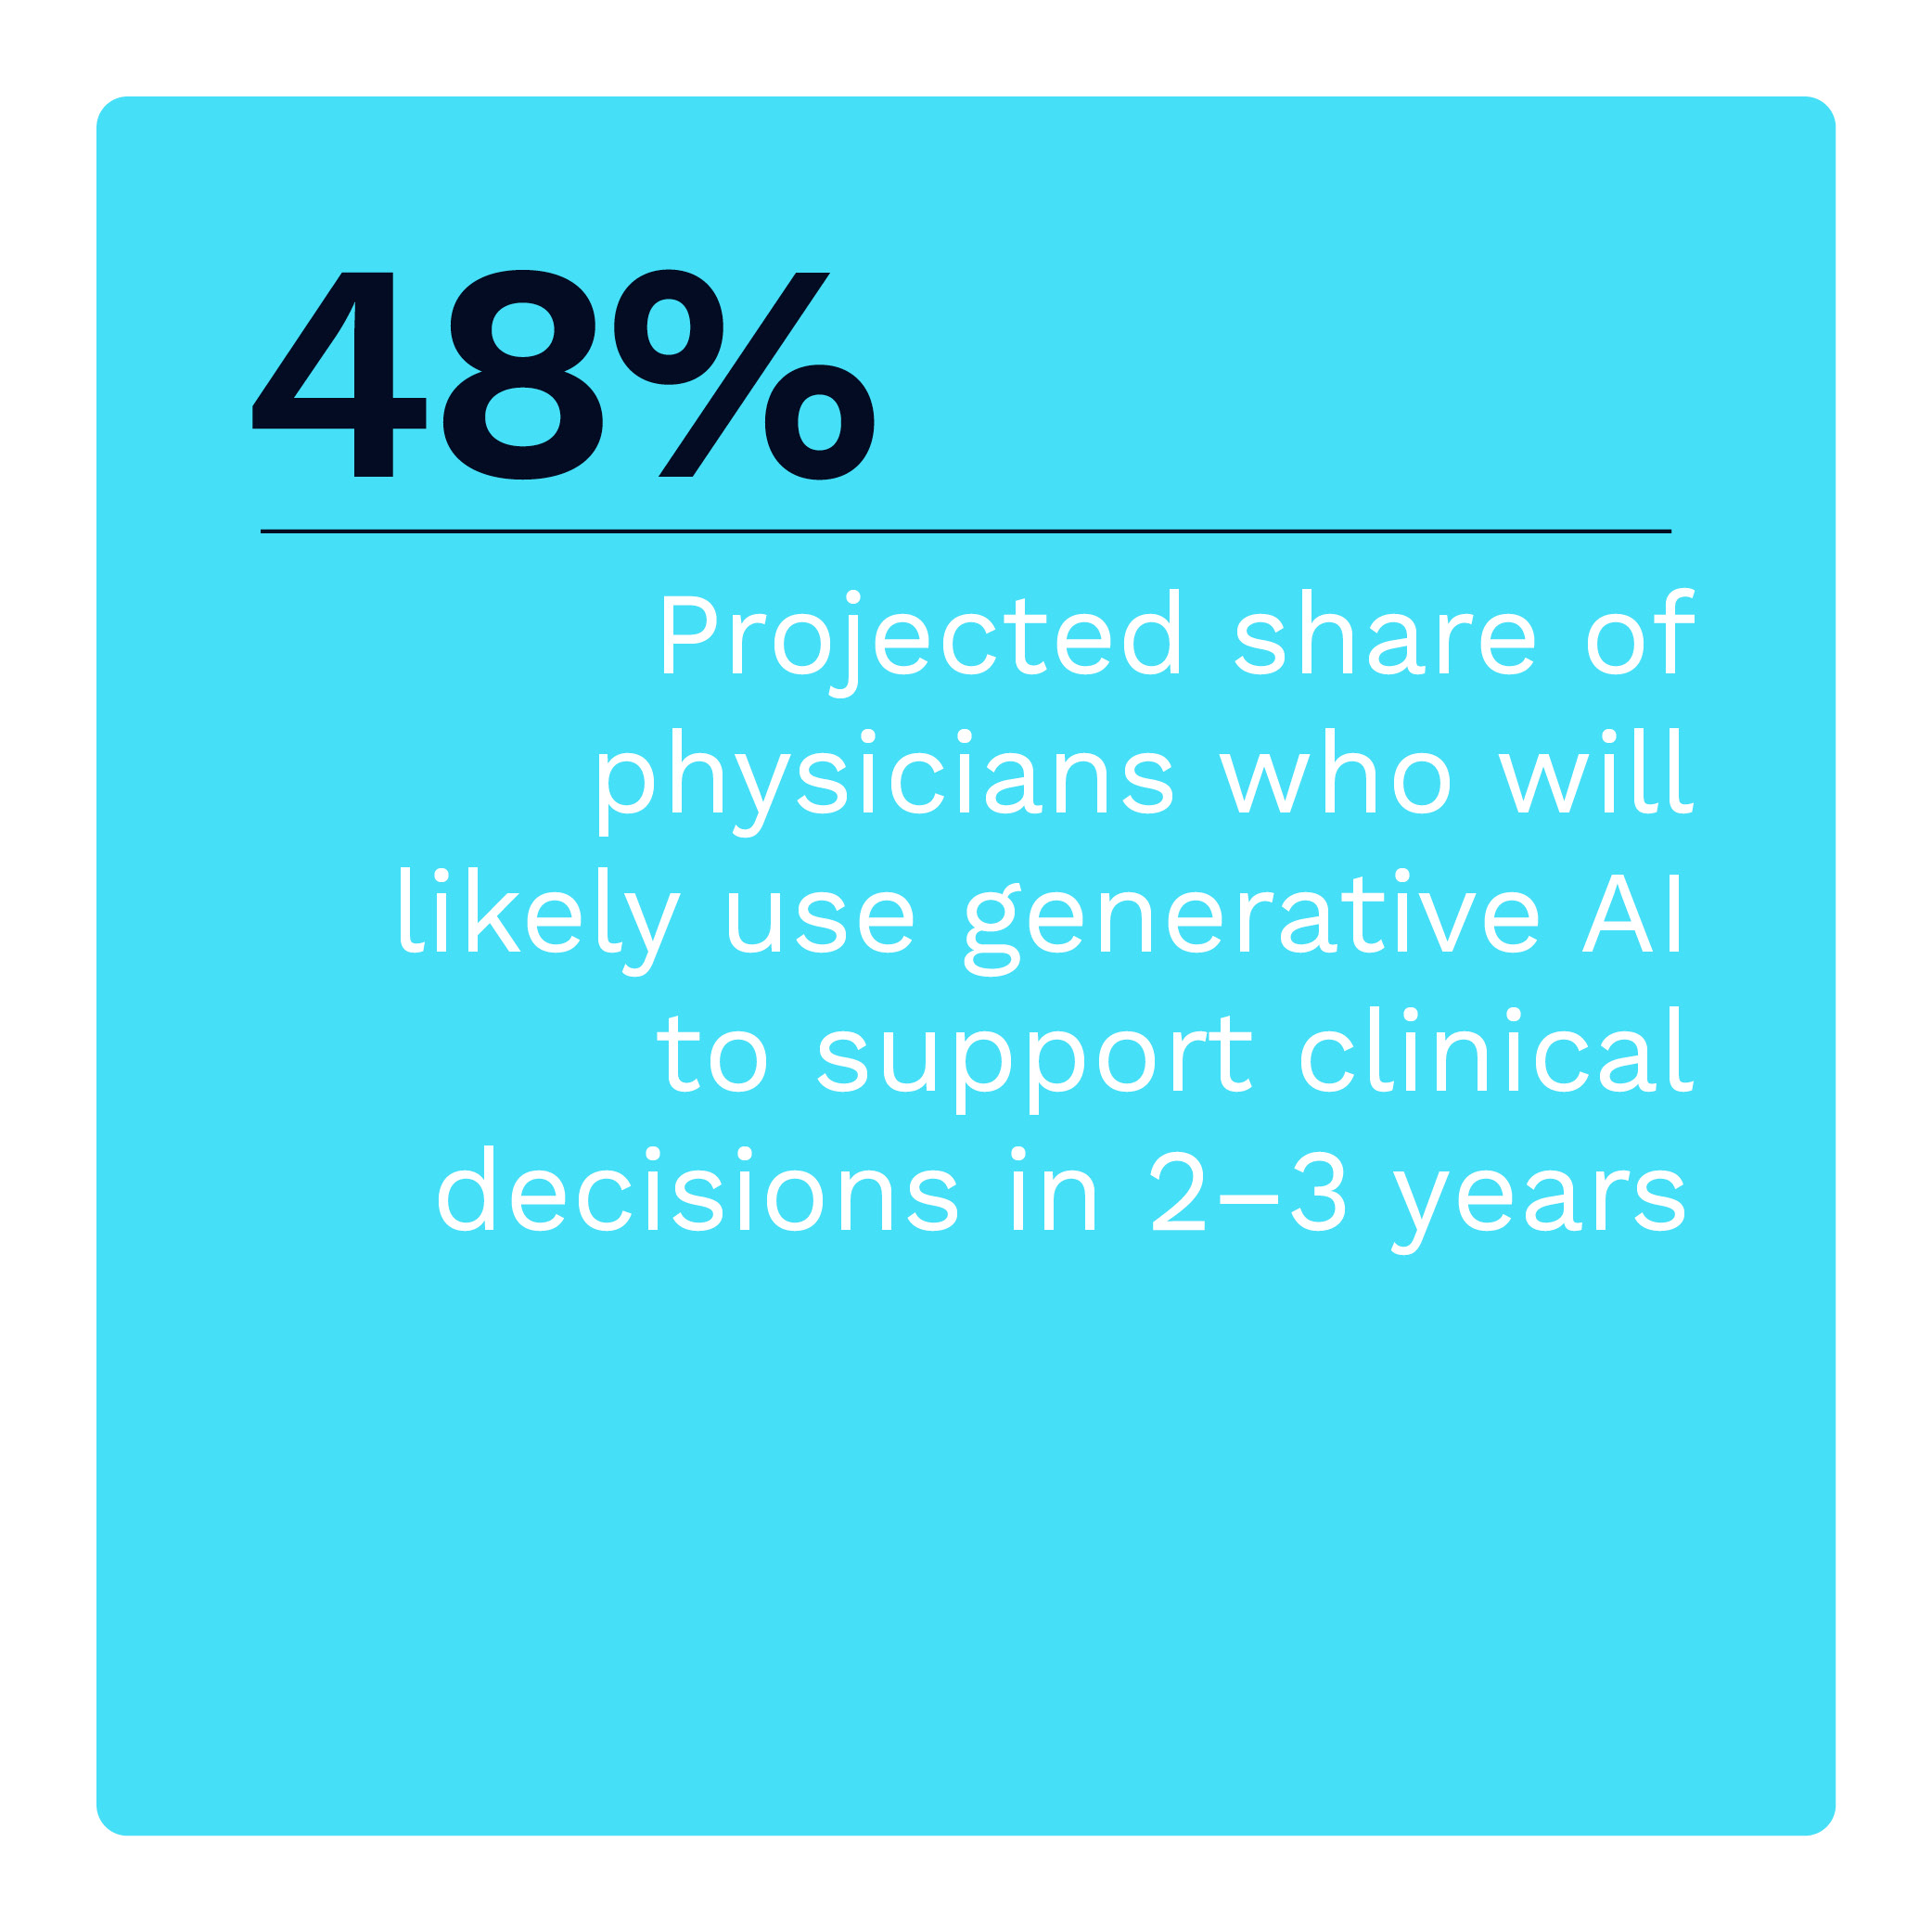 48%: Projected share of physicians who will likely use generative AI to aid in clinical decisions in 2-3 years